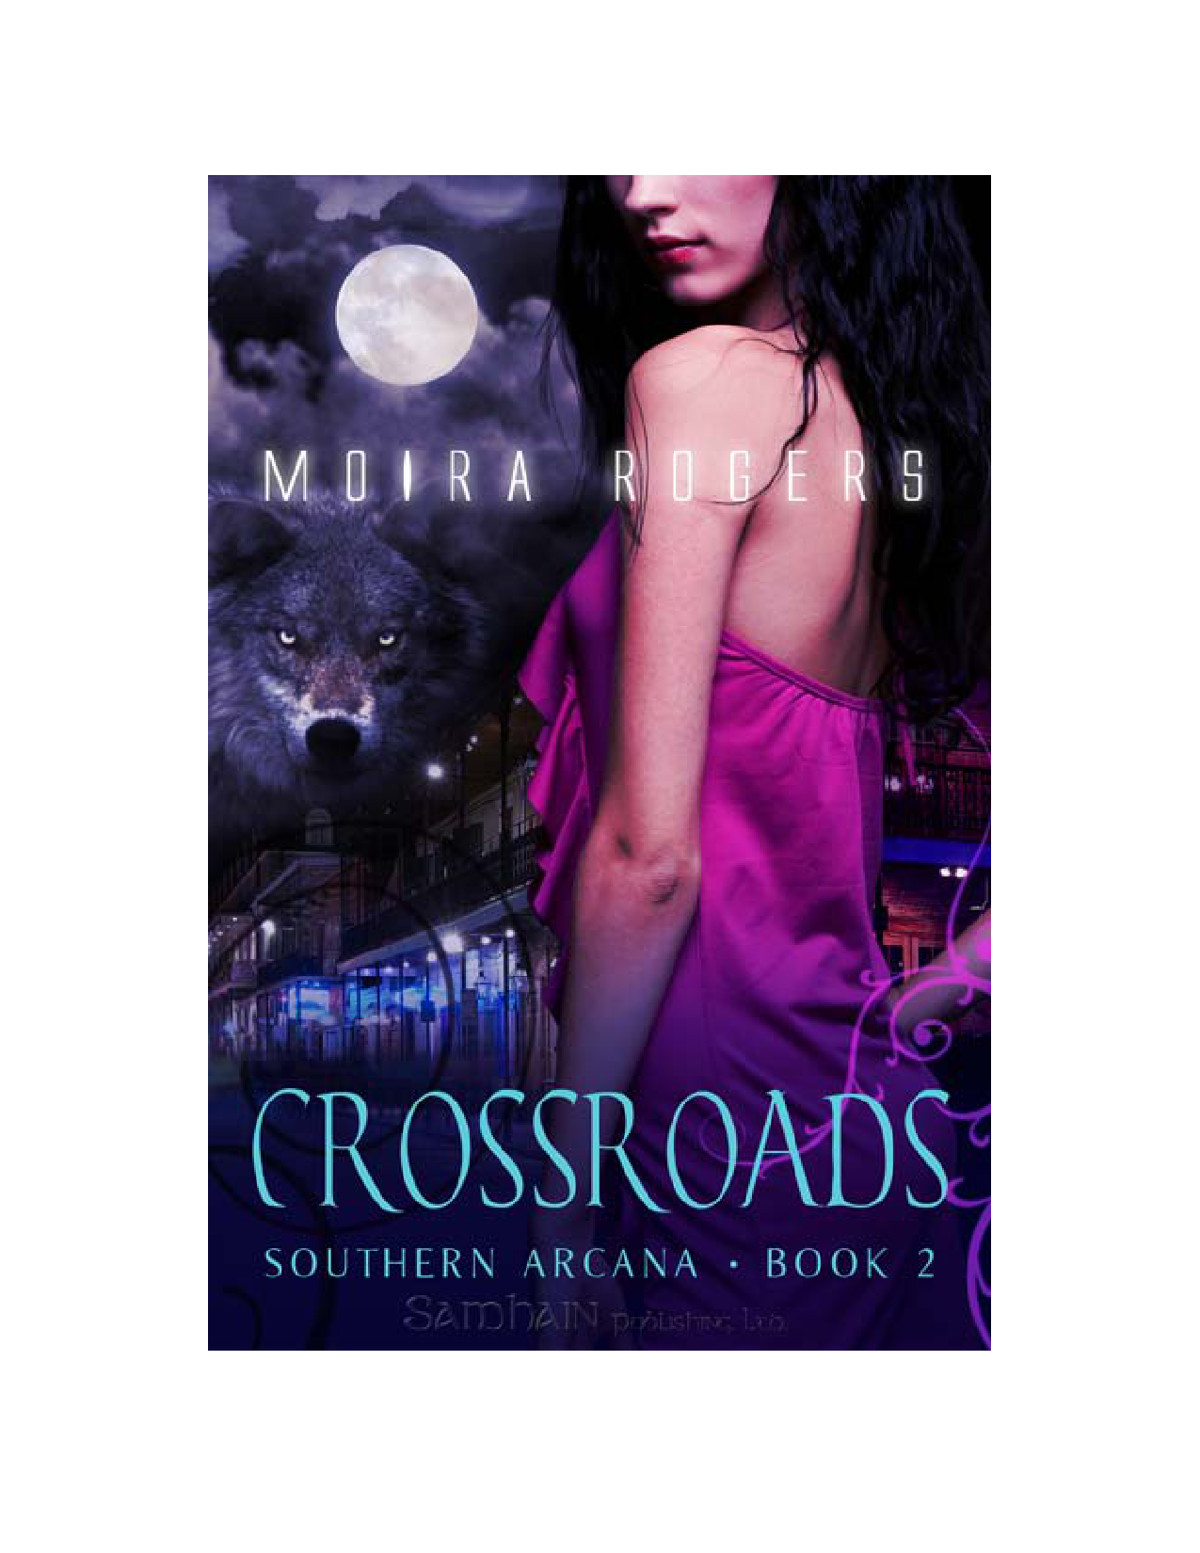 [Southern Arcana 2.0] Crossroads by Moira Rogers